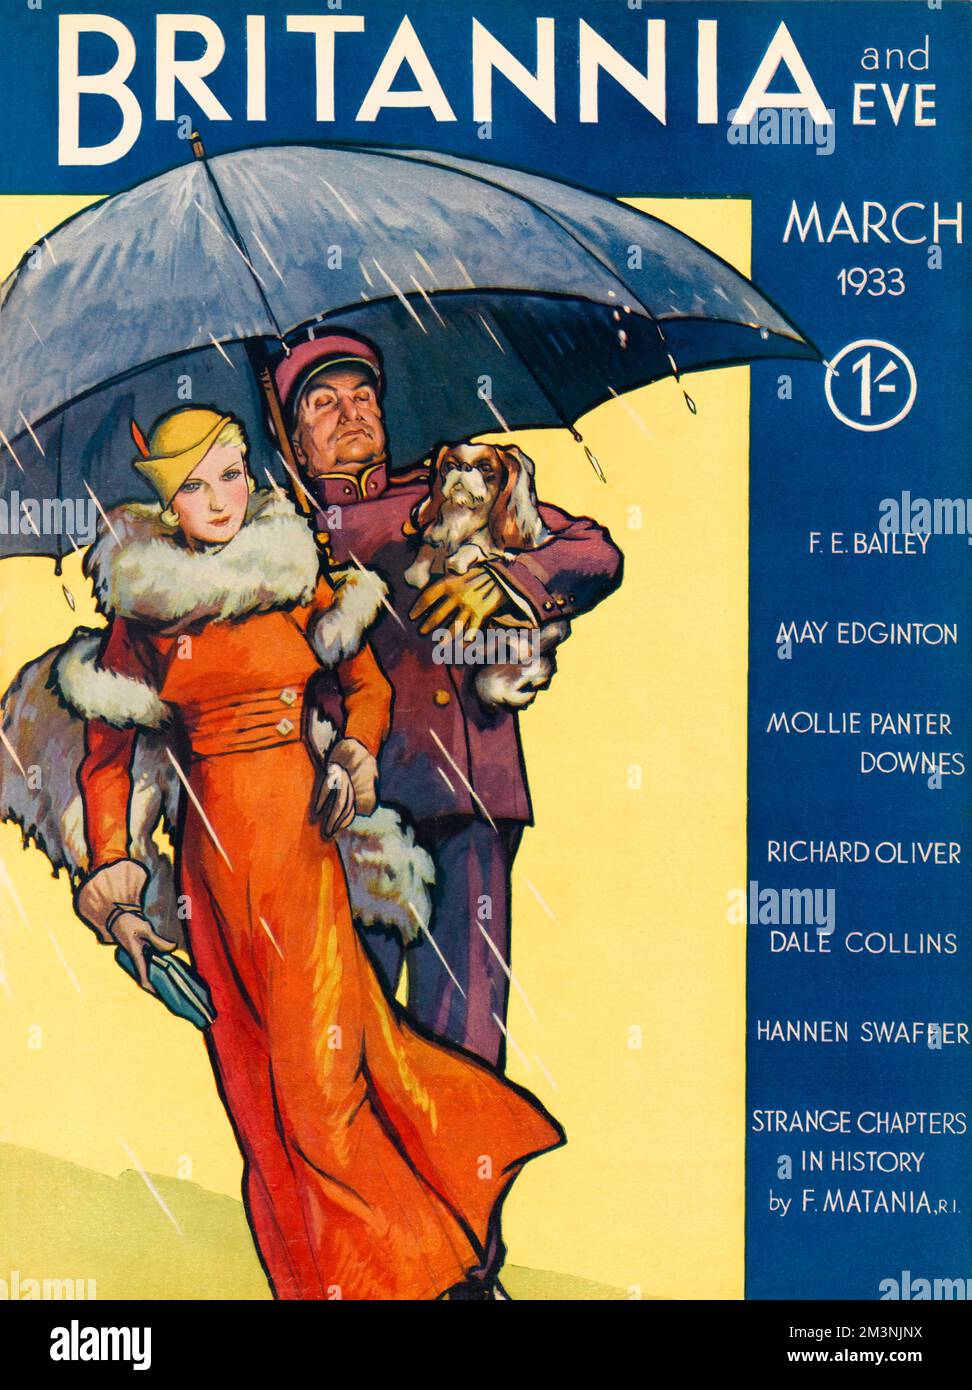 Front cover illustration featuring an extremely glamorous lady wearing a bright orange coat with fur trims, a yellow hat with orange feather and holding a blue clutch bag. Her porter, decked out in a purple suit with matching cap, shields her from the rain and carries her pet pooch.     Date: 1933 Stock Photo